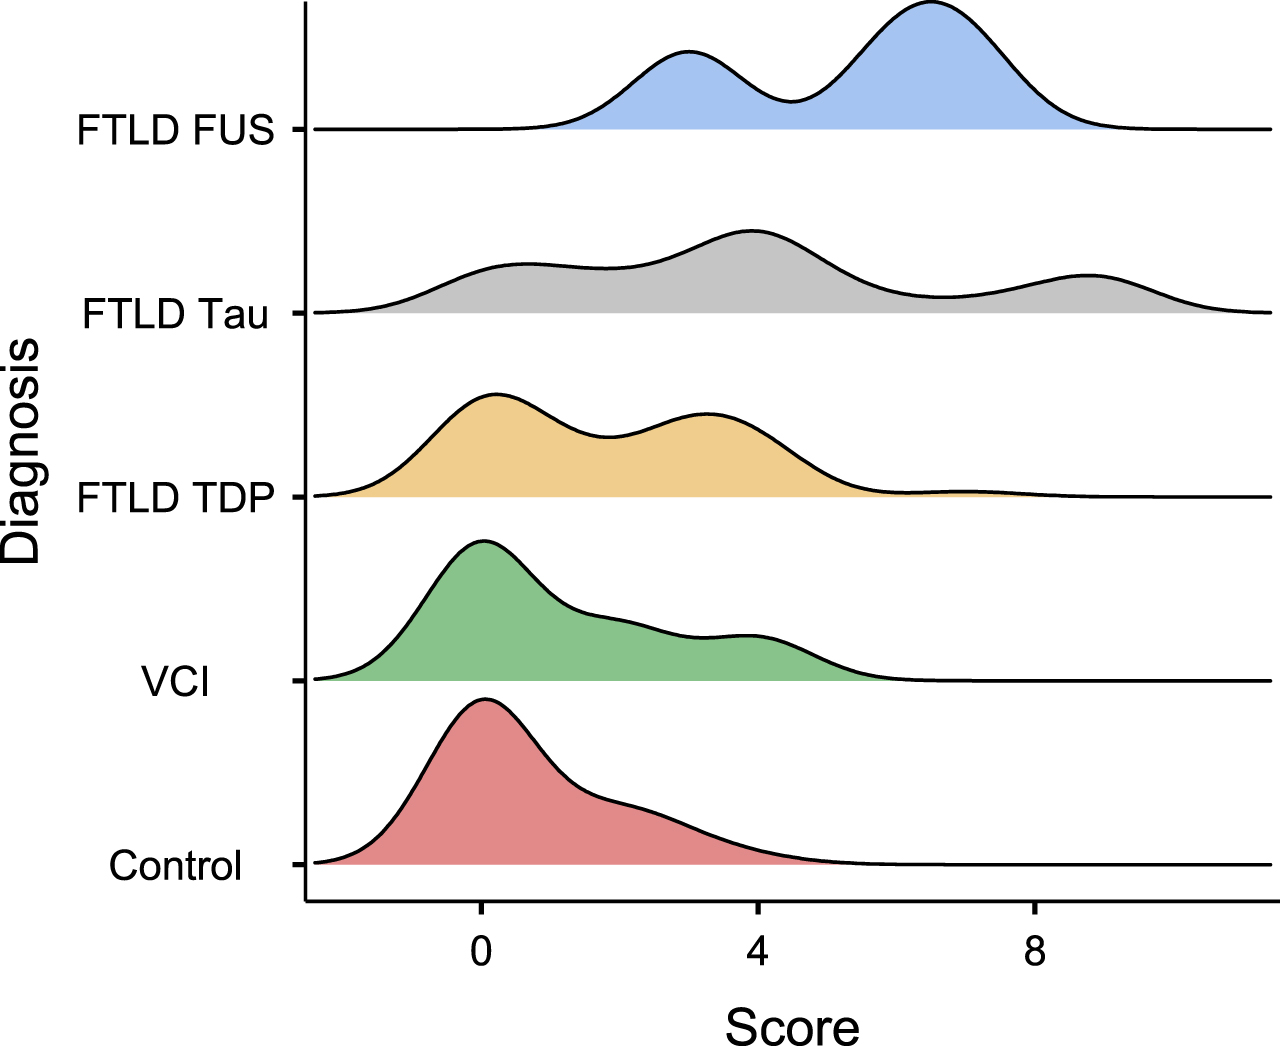 Density plot indicating the distribution of median degeneration score (x-axis) of the locus coeruleus (LC) according to various subgroups (y-axis) of FTLD, VCI, and cognitively healthy control subjects. The subgroups consisted of FTLD-TDP, FTLD-tau, and FTLD-FUS. A scale from 0 to 9 was used for assessment, with 0 being healthy LC and 9 being severely degenerated LC. The scoring system was based on the number of manually counted pigmented cells of the best-preserved nucleus as well as depigmentation. The highest degeneration score of 9 points was for 0–10 counted cells, followed by a score of 8 points for 11–20 counted cells, 6 points for 21–40 counted cells, 4 points for 41–60 counted cells, and 2 points for 61–80 cells. A healthy LC was considered to correspond to≥81 cells. An additional point was given if > 50% of the neurons substantially lacked pigmentation in the cases with a neuron count of 21 or more. The figure was made using Jamovi 2.2.2. FTLD, frontotemporal lobar dementia; FUS, fused in sarcoma; TDP, TAR-DNA binding protein 43; VCI, vascular cognitive impairment.